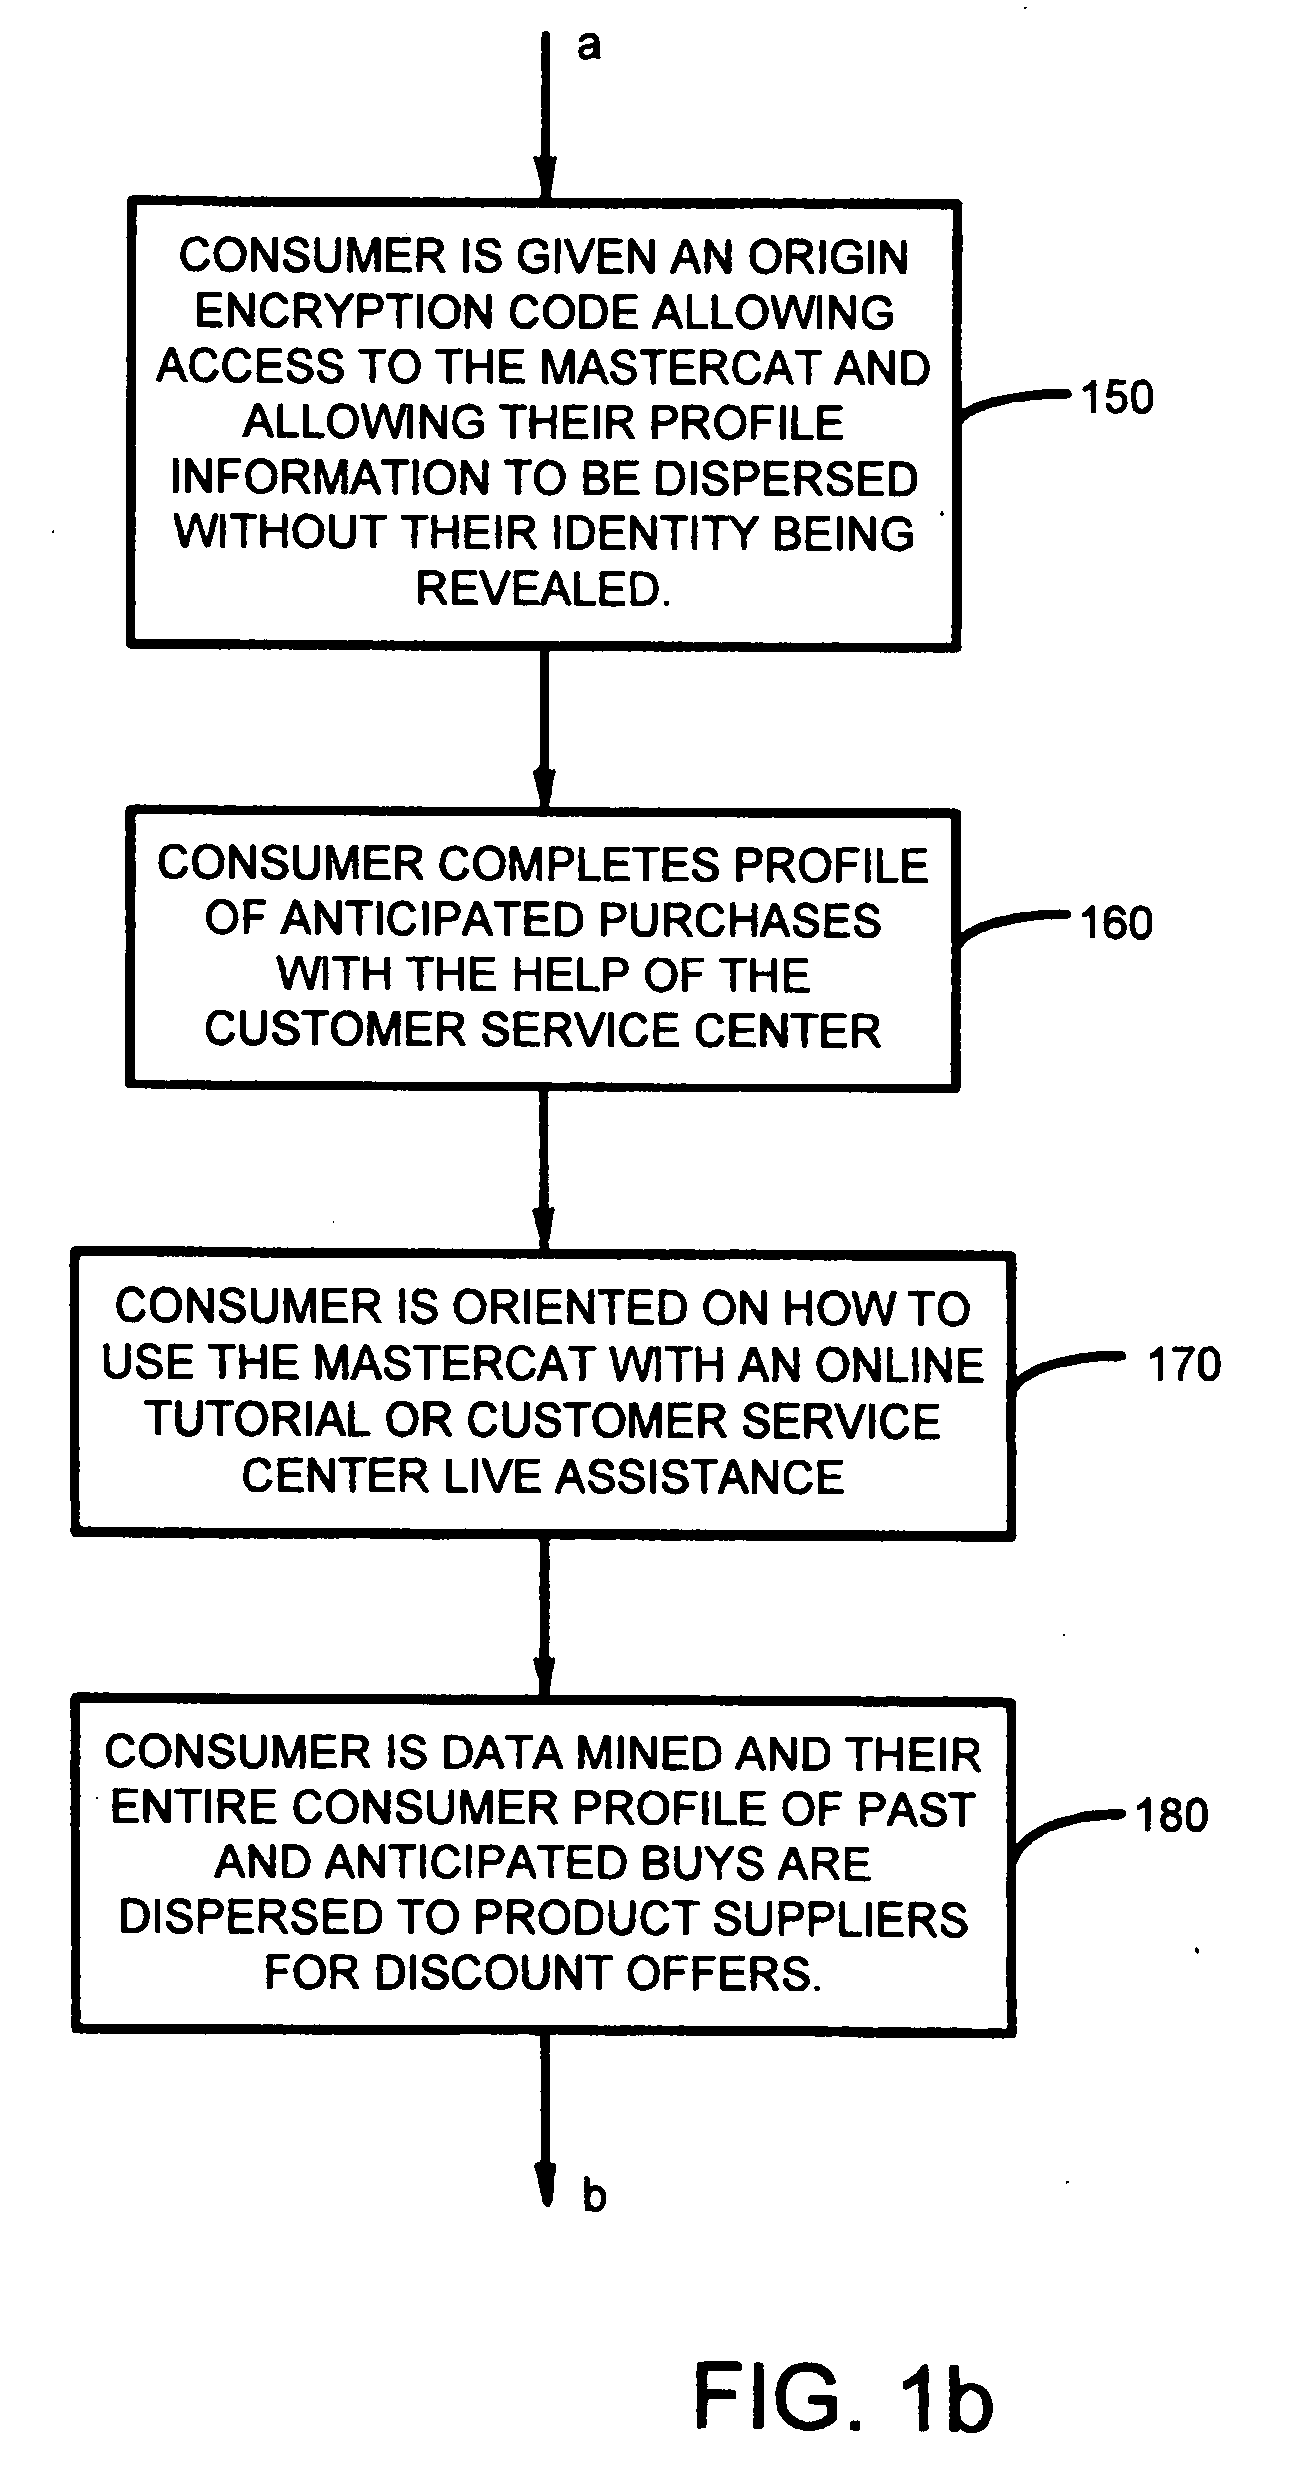 Pooling data for consumer credit or debit cards